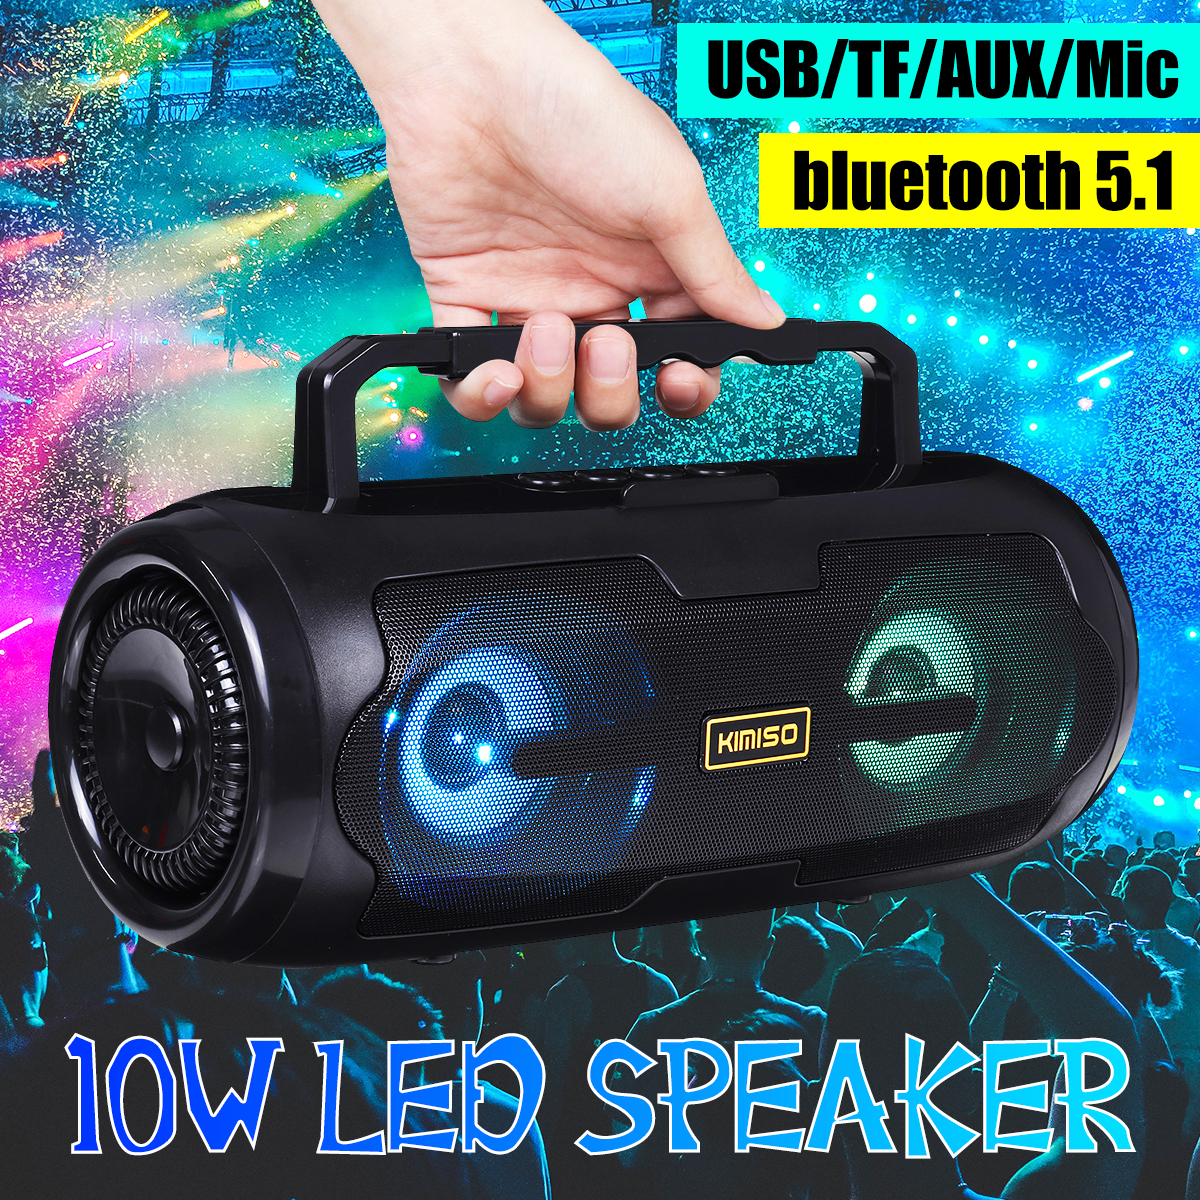 10W-Wireless-bluetooth-Speaker-LED-Portable-Amplifier-Subwoofer-Boombox-FM-Radio-TF-Card-USB-Outdoor-1931993-1